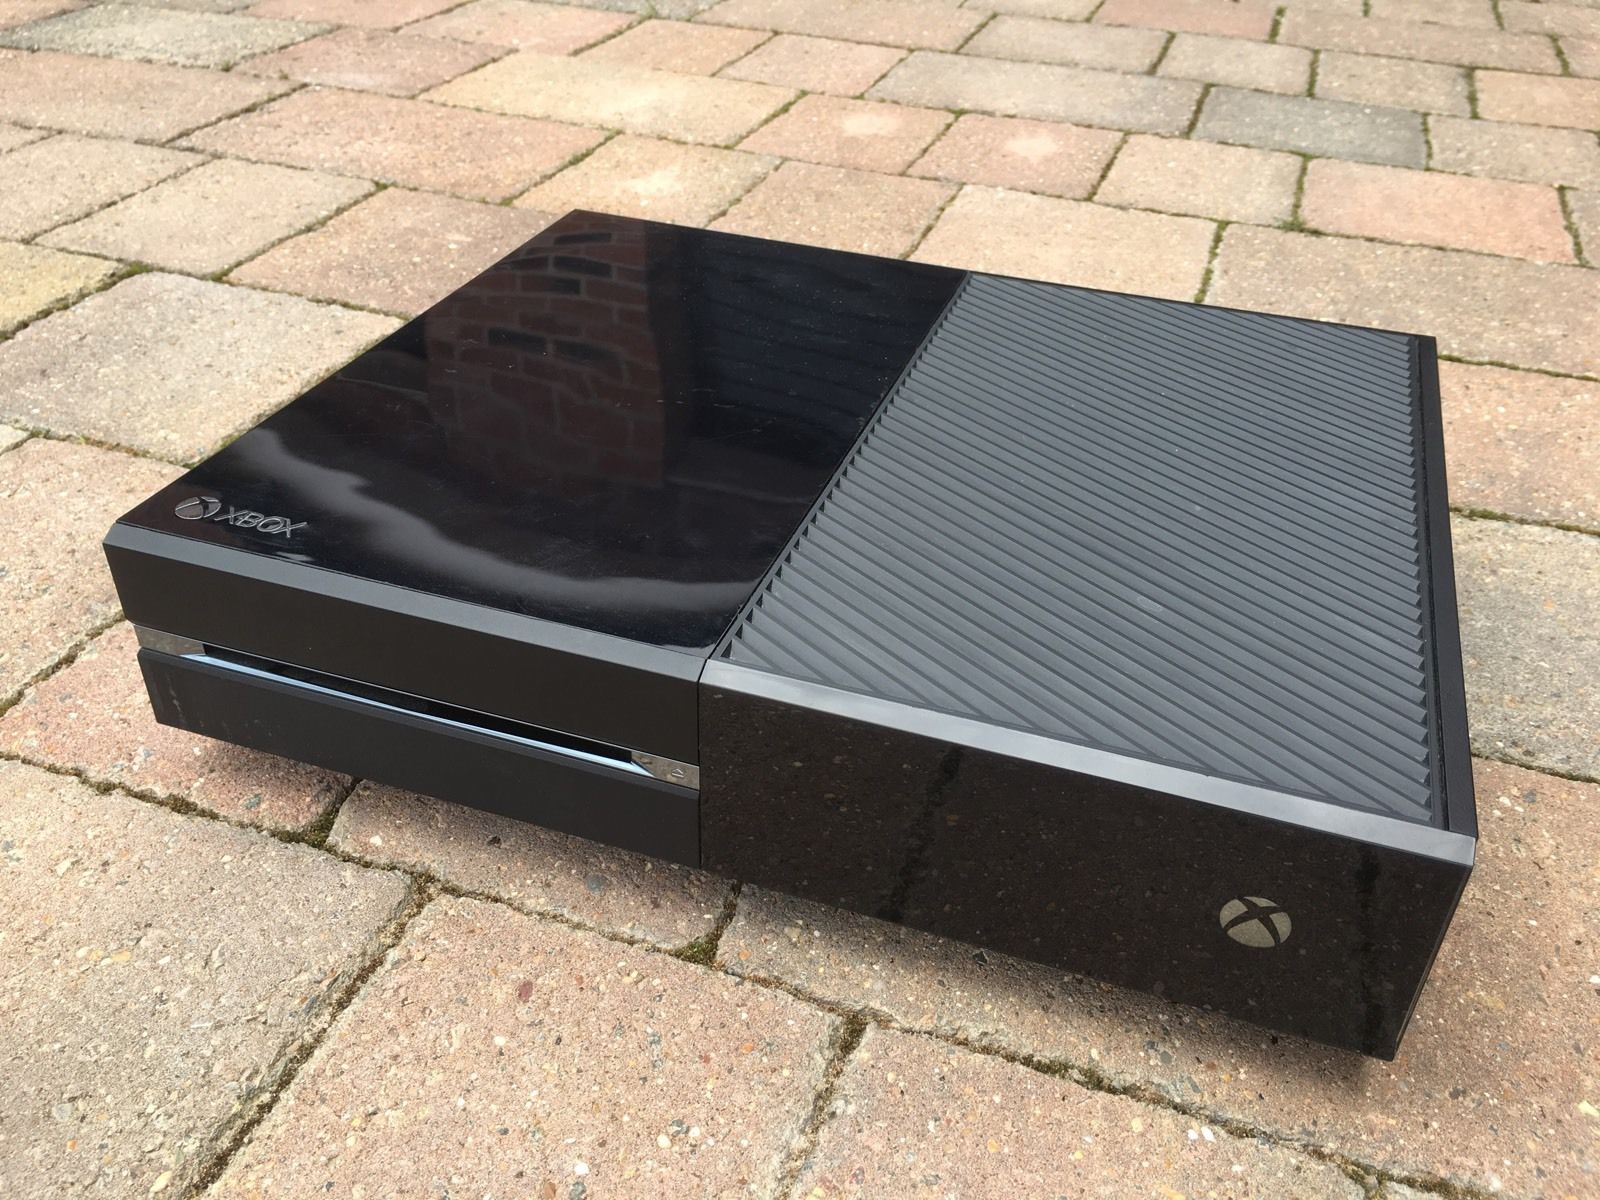 Microsoft Xbox One 500 GB Games Console Only Full Working Order 30 Day Returns